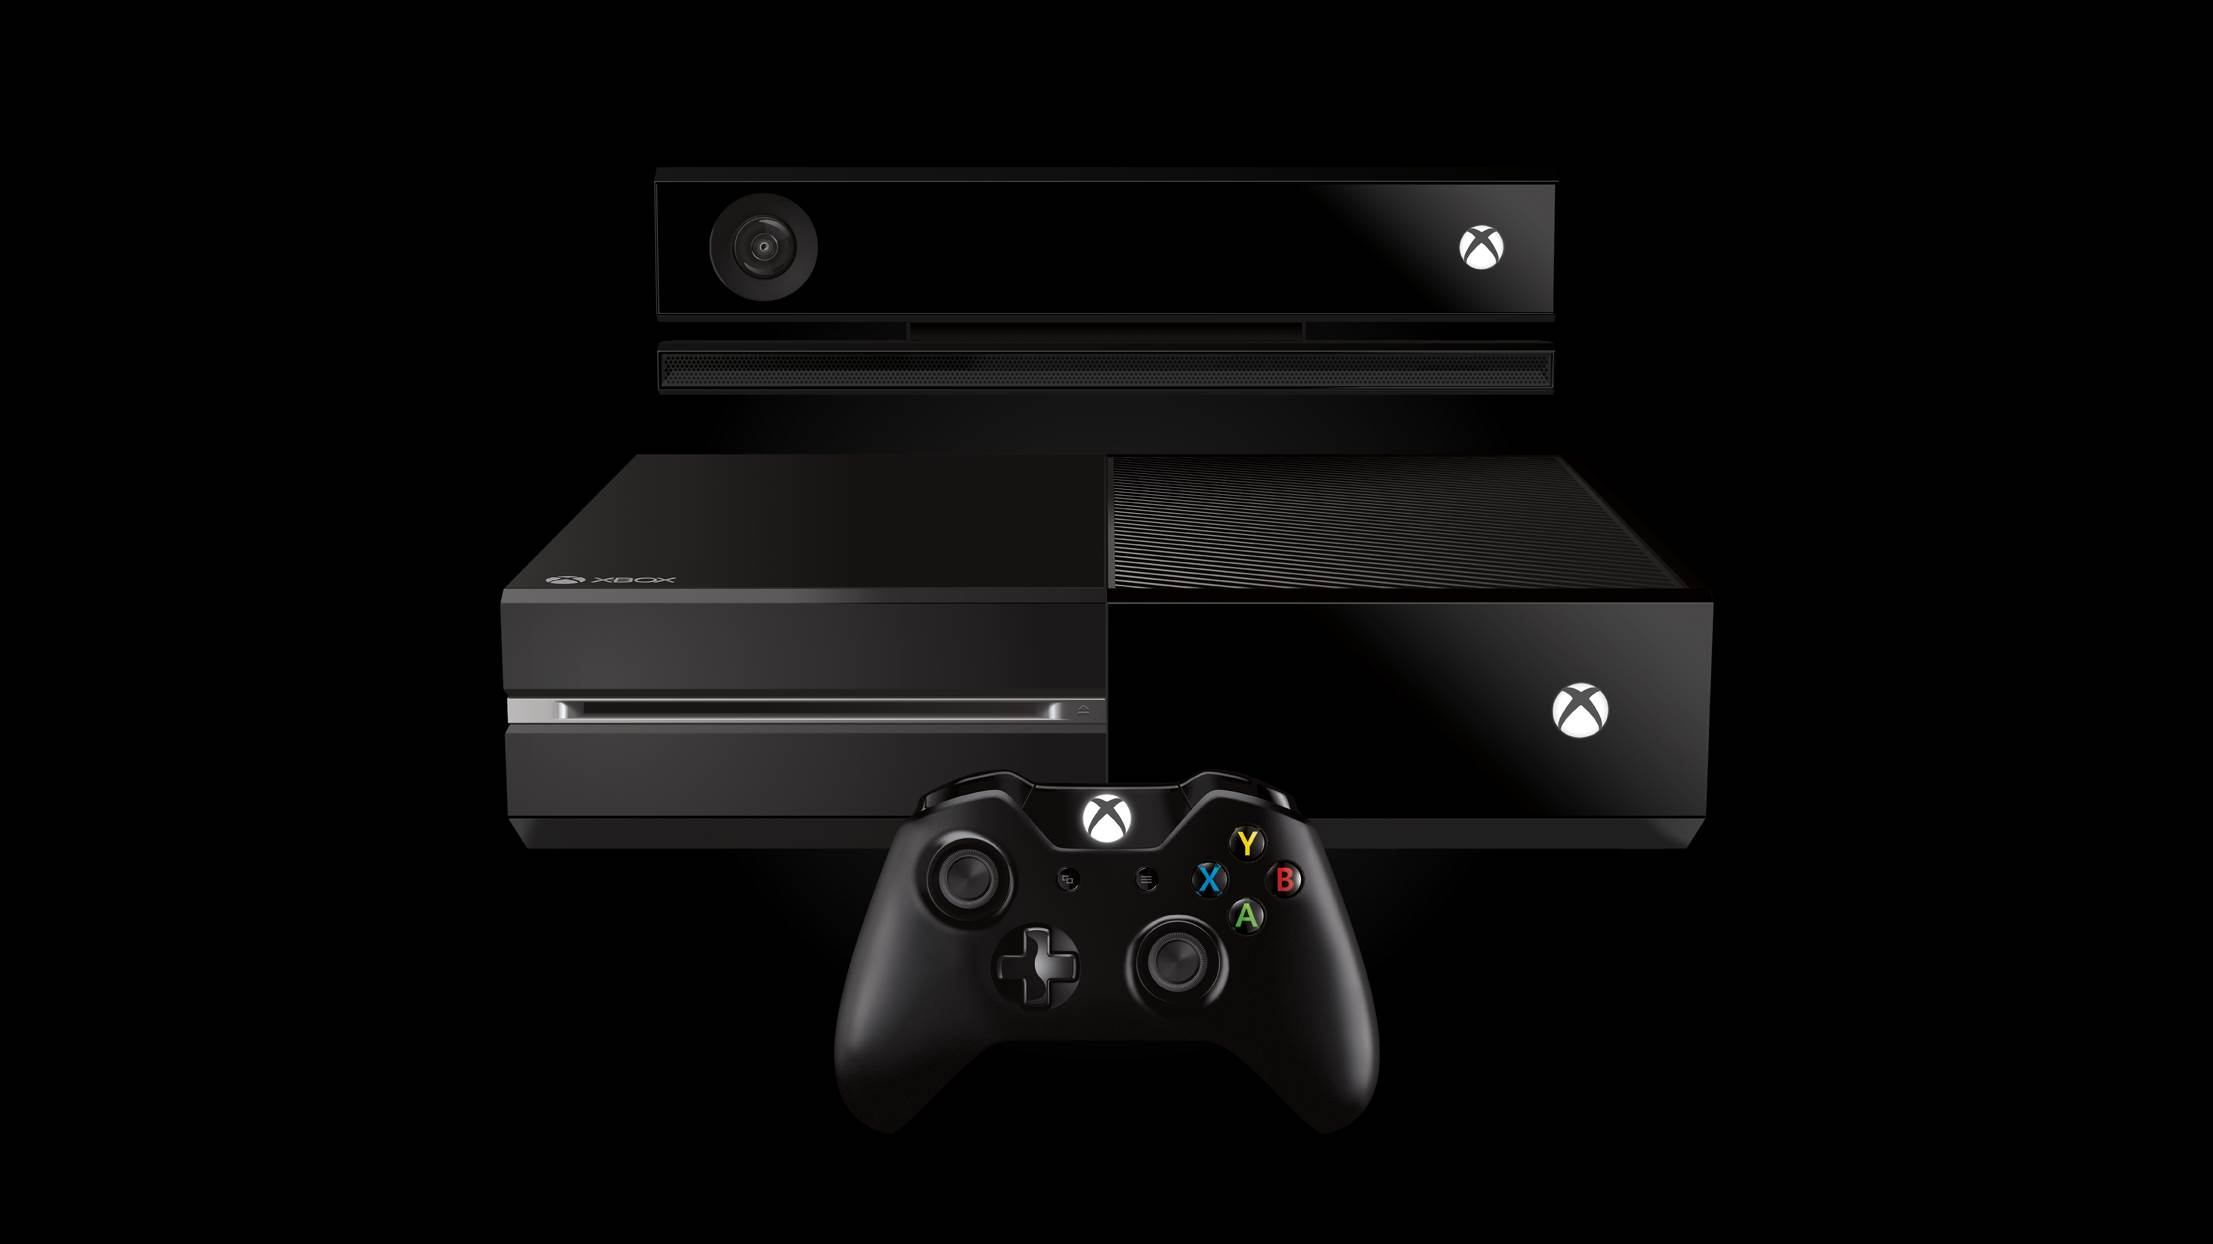 2213x1244 Xbox One Wallpapers in 1080P HD